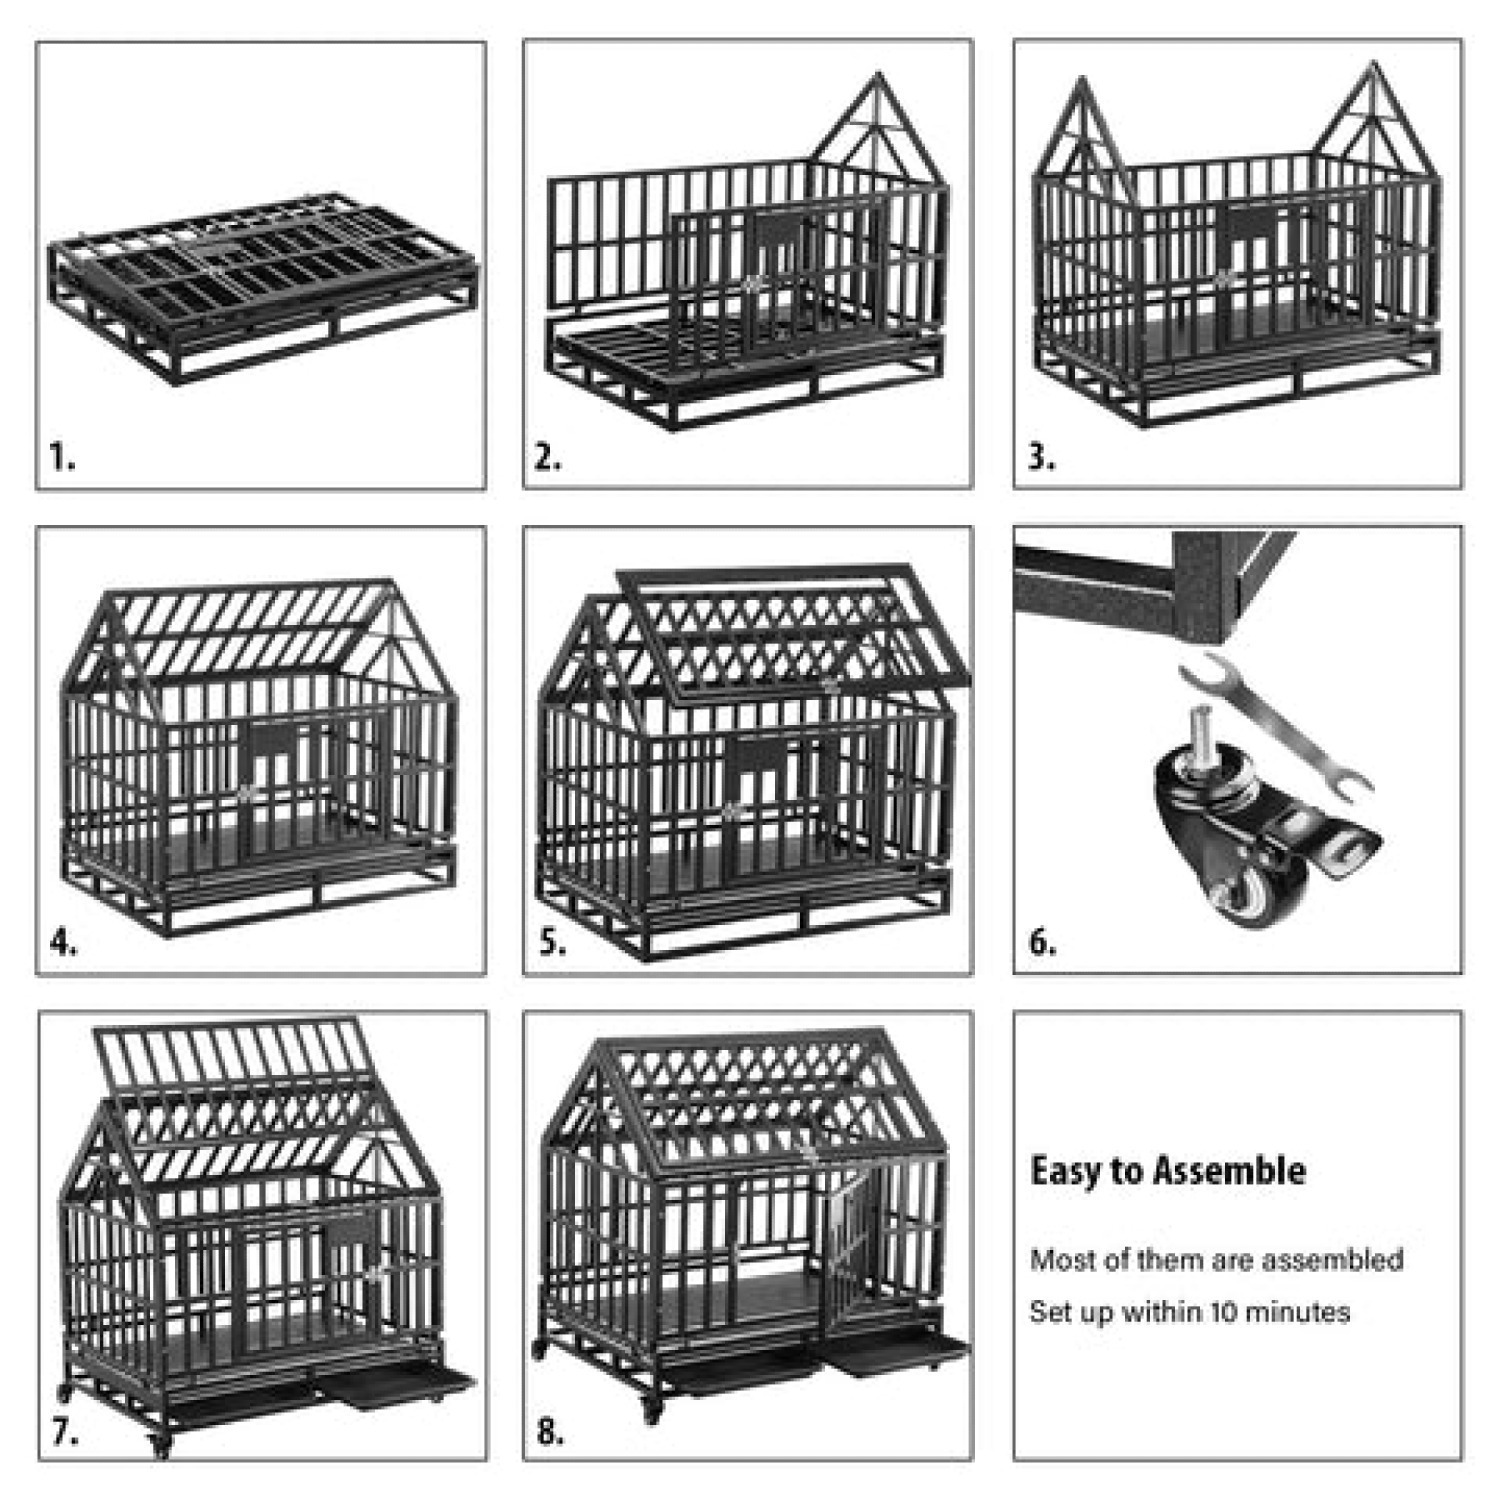 Ainfox 38 inch Dog Cage (Brown) $50 +Free Shipping